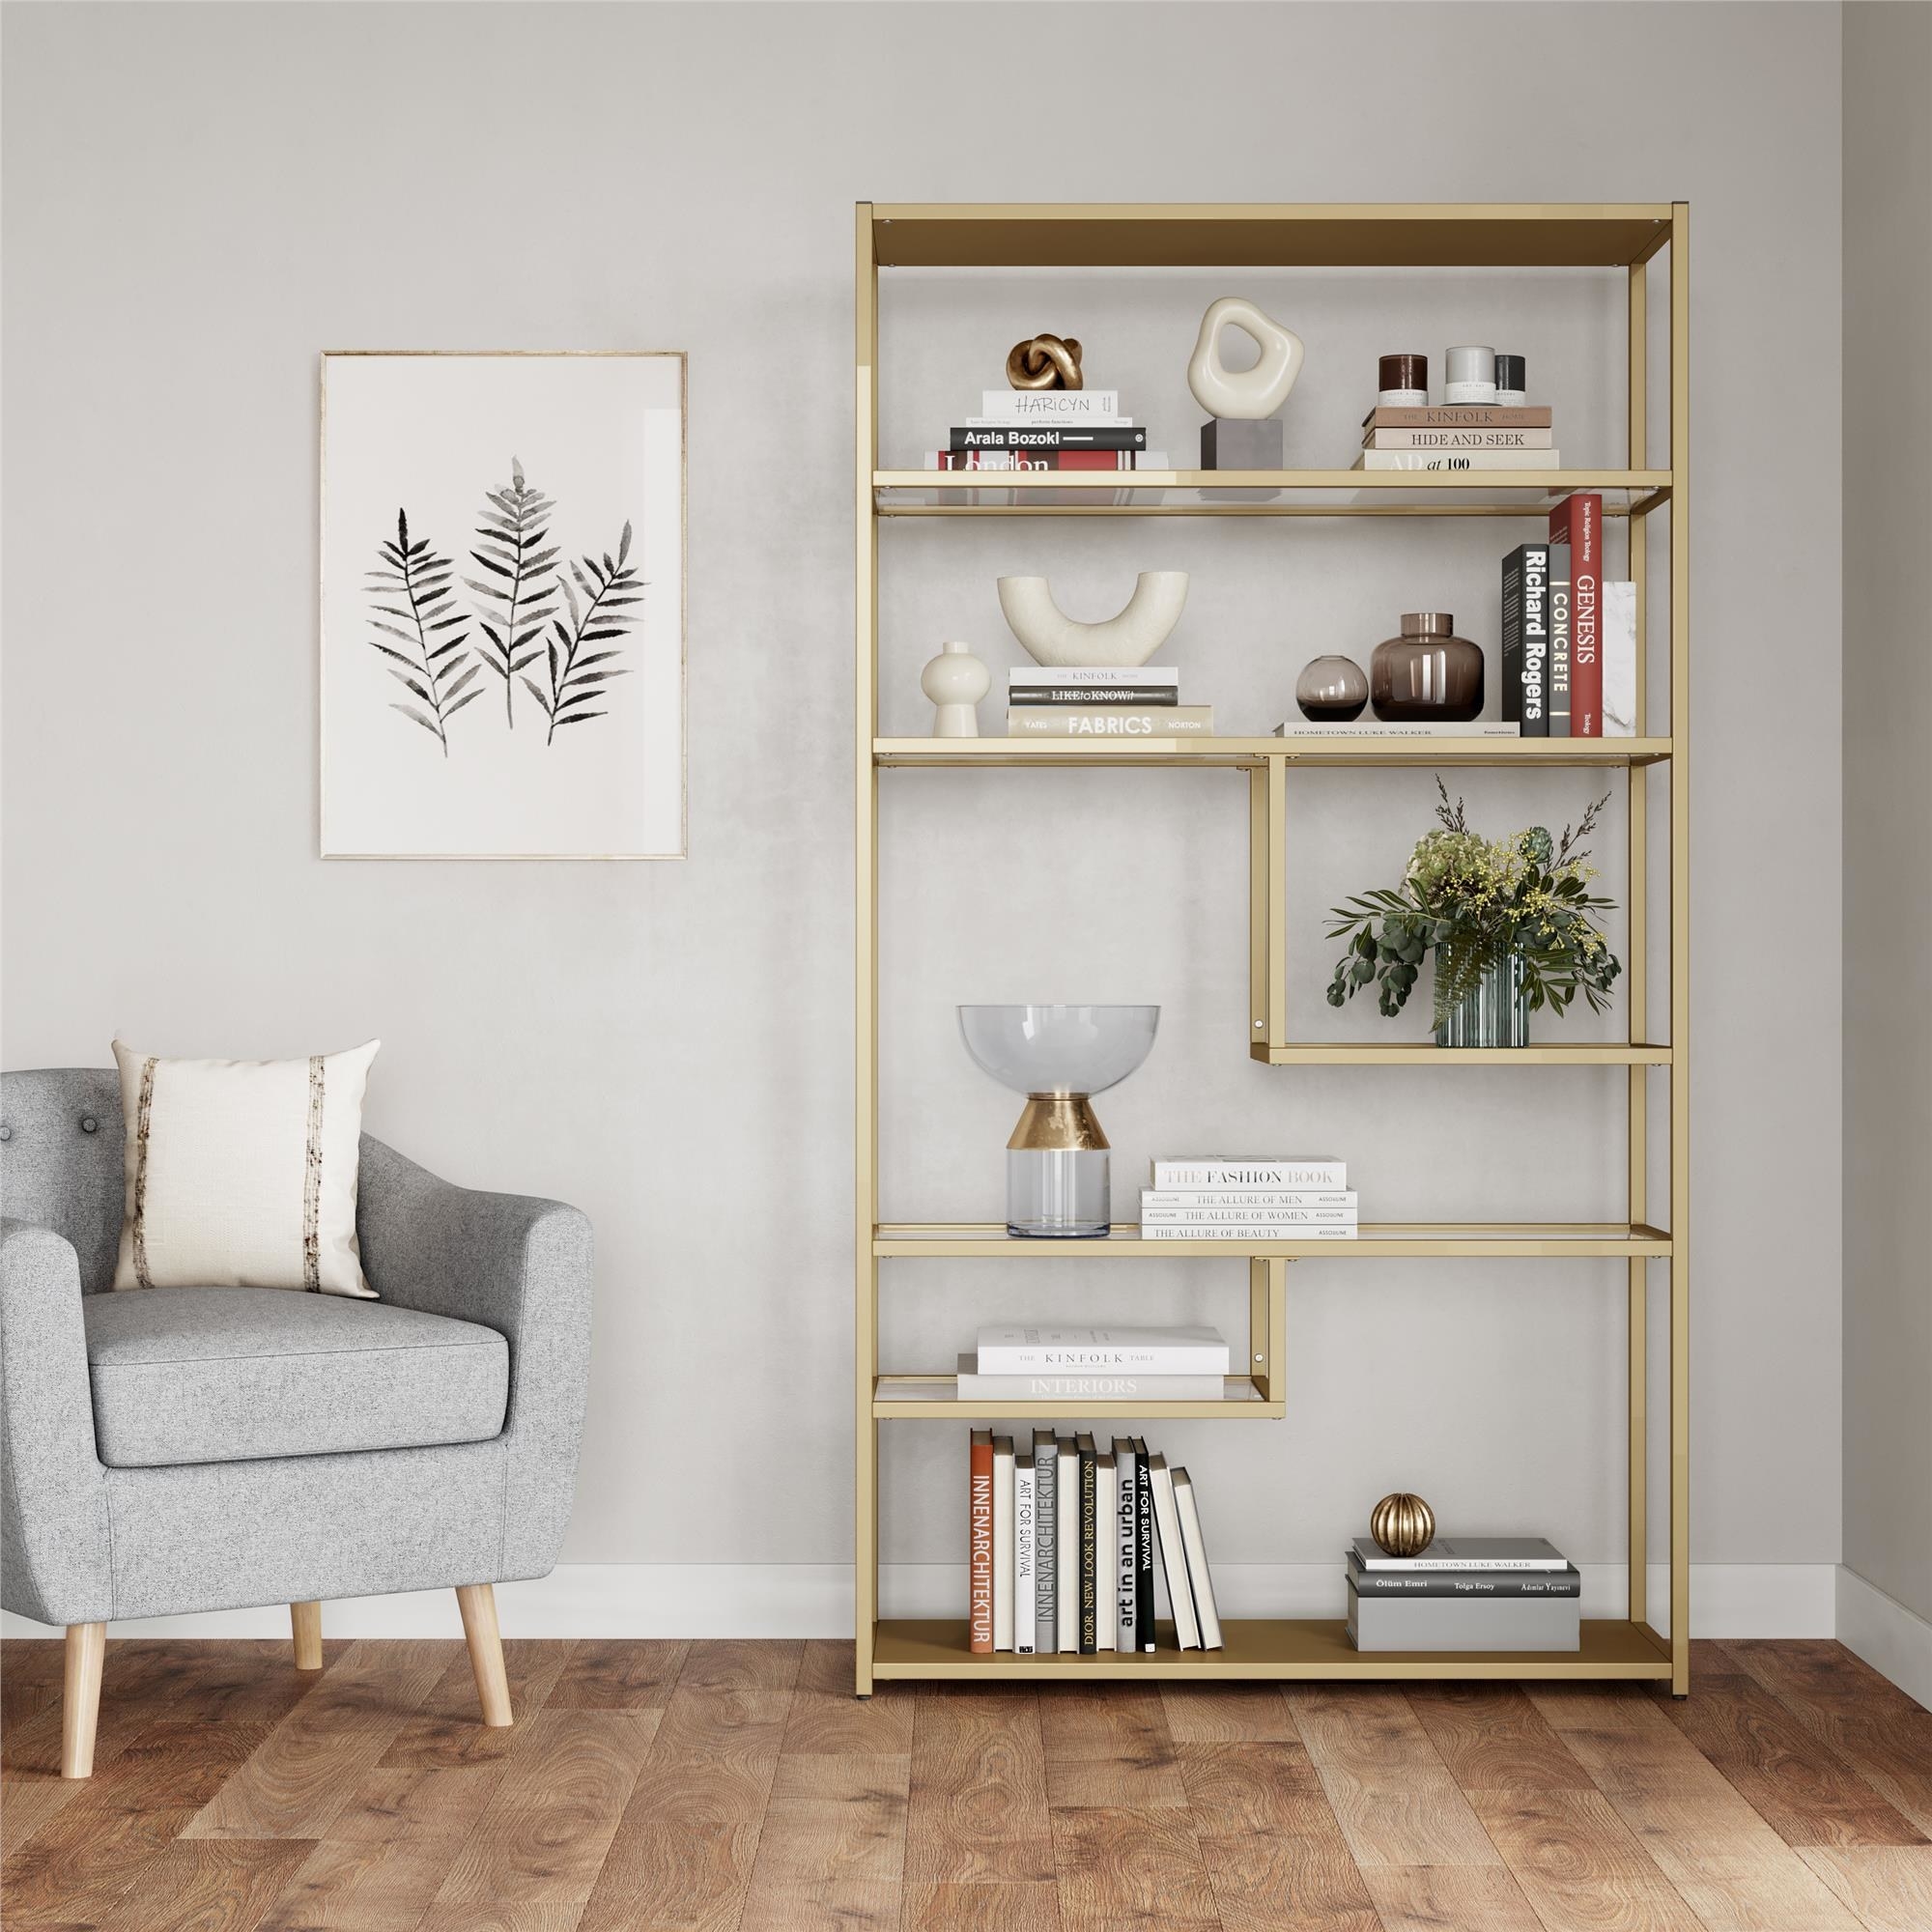 gold geometric book shelf with books and trinkets on it, next to a grey chair